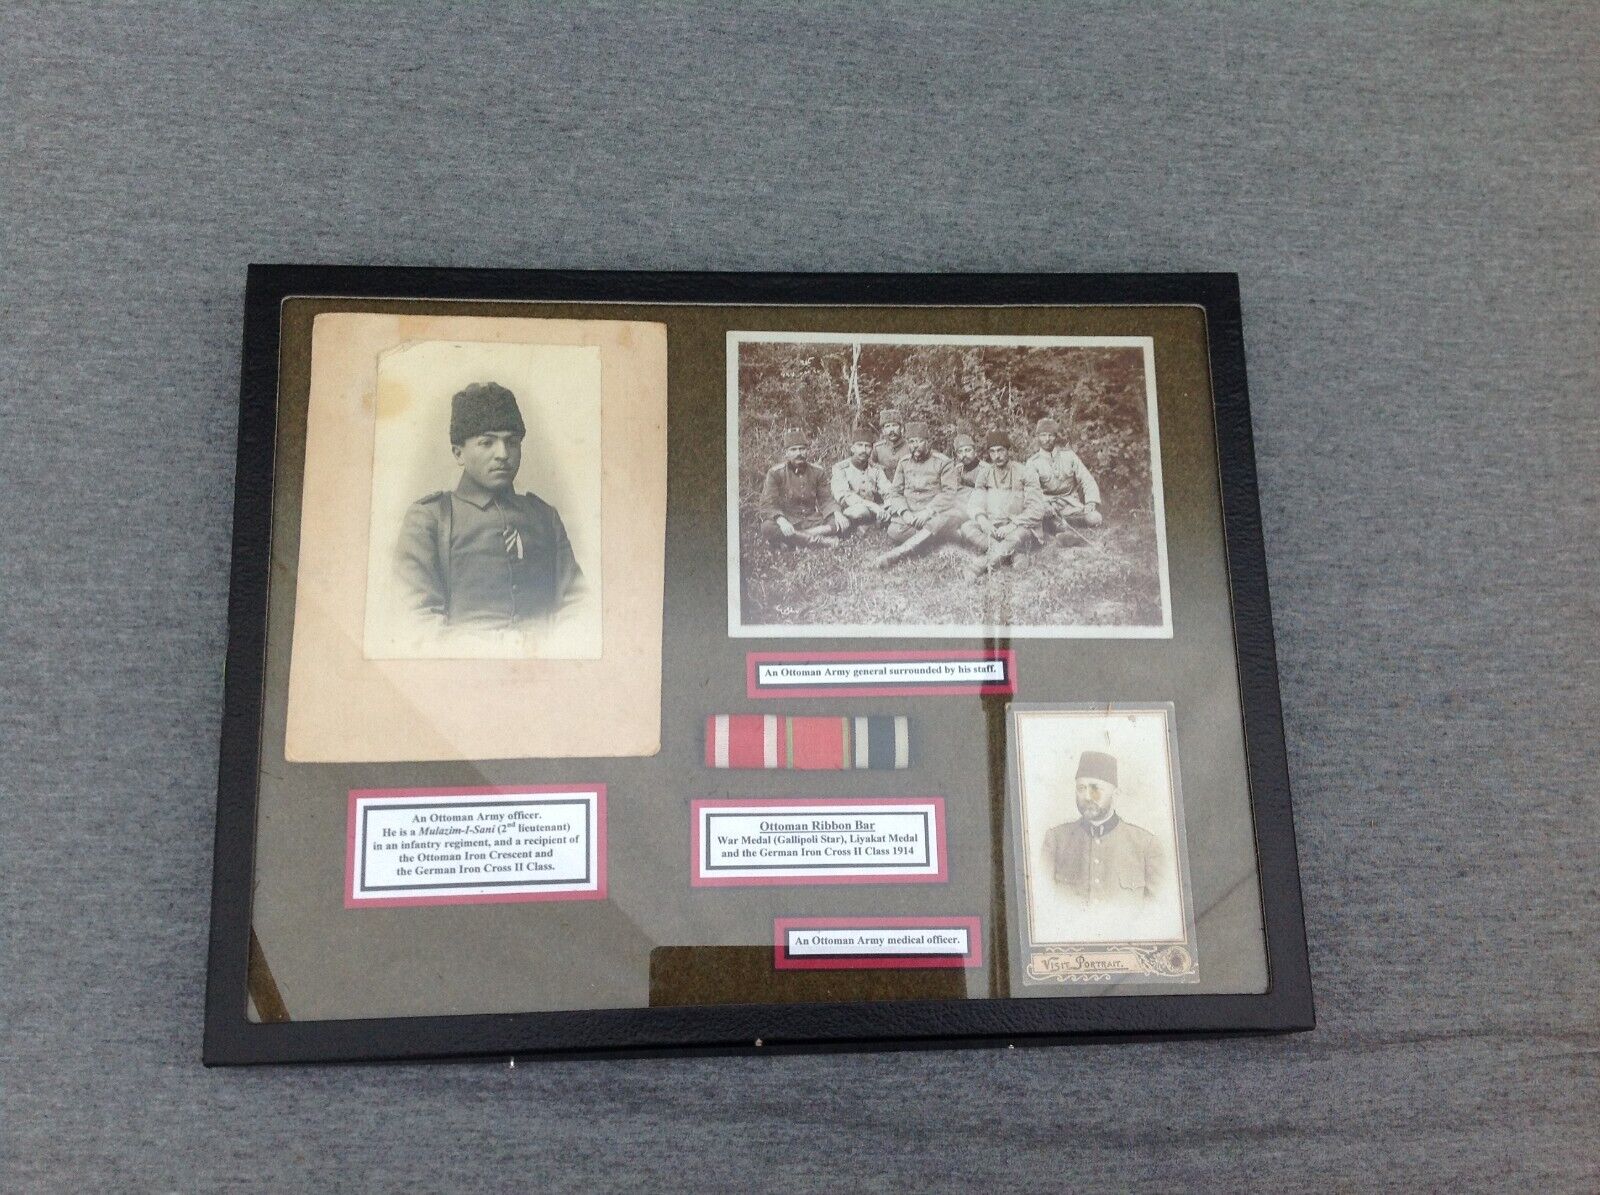 WWI Ottoman Ribbon Bar & Photographs with Descriptions in Display Box